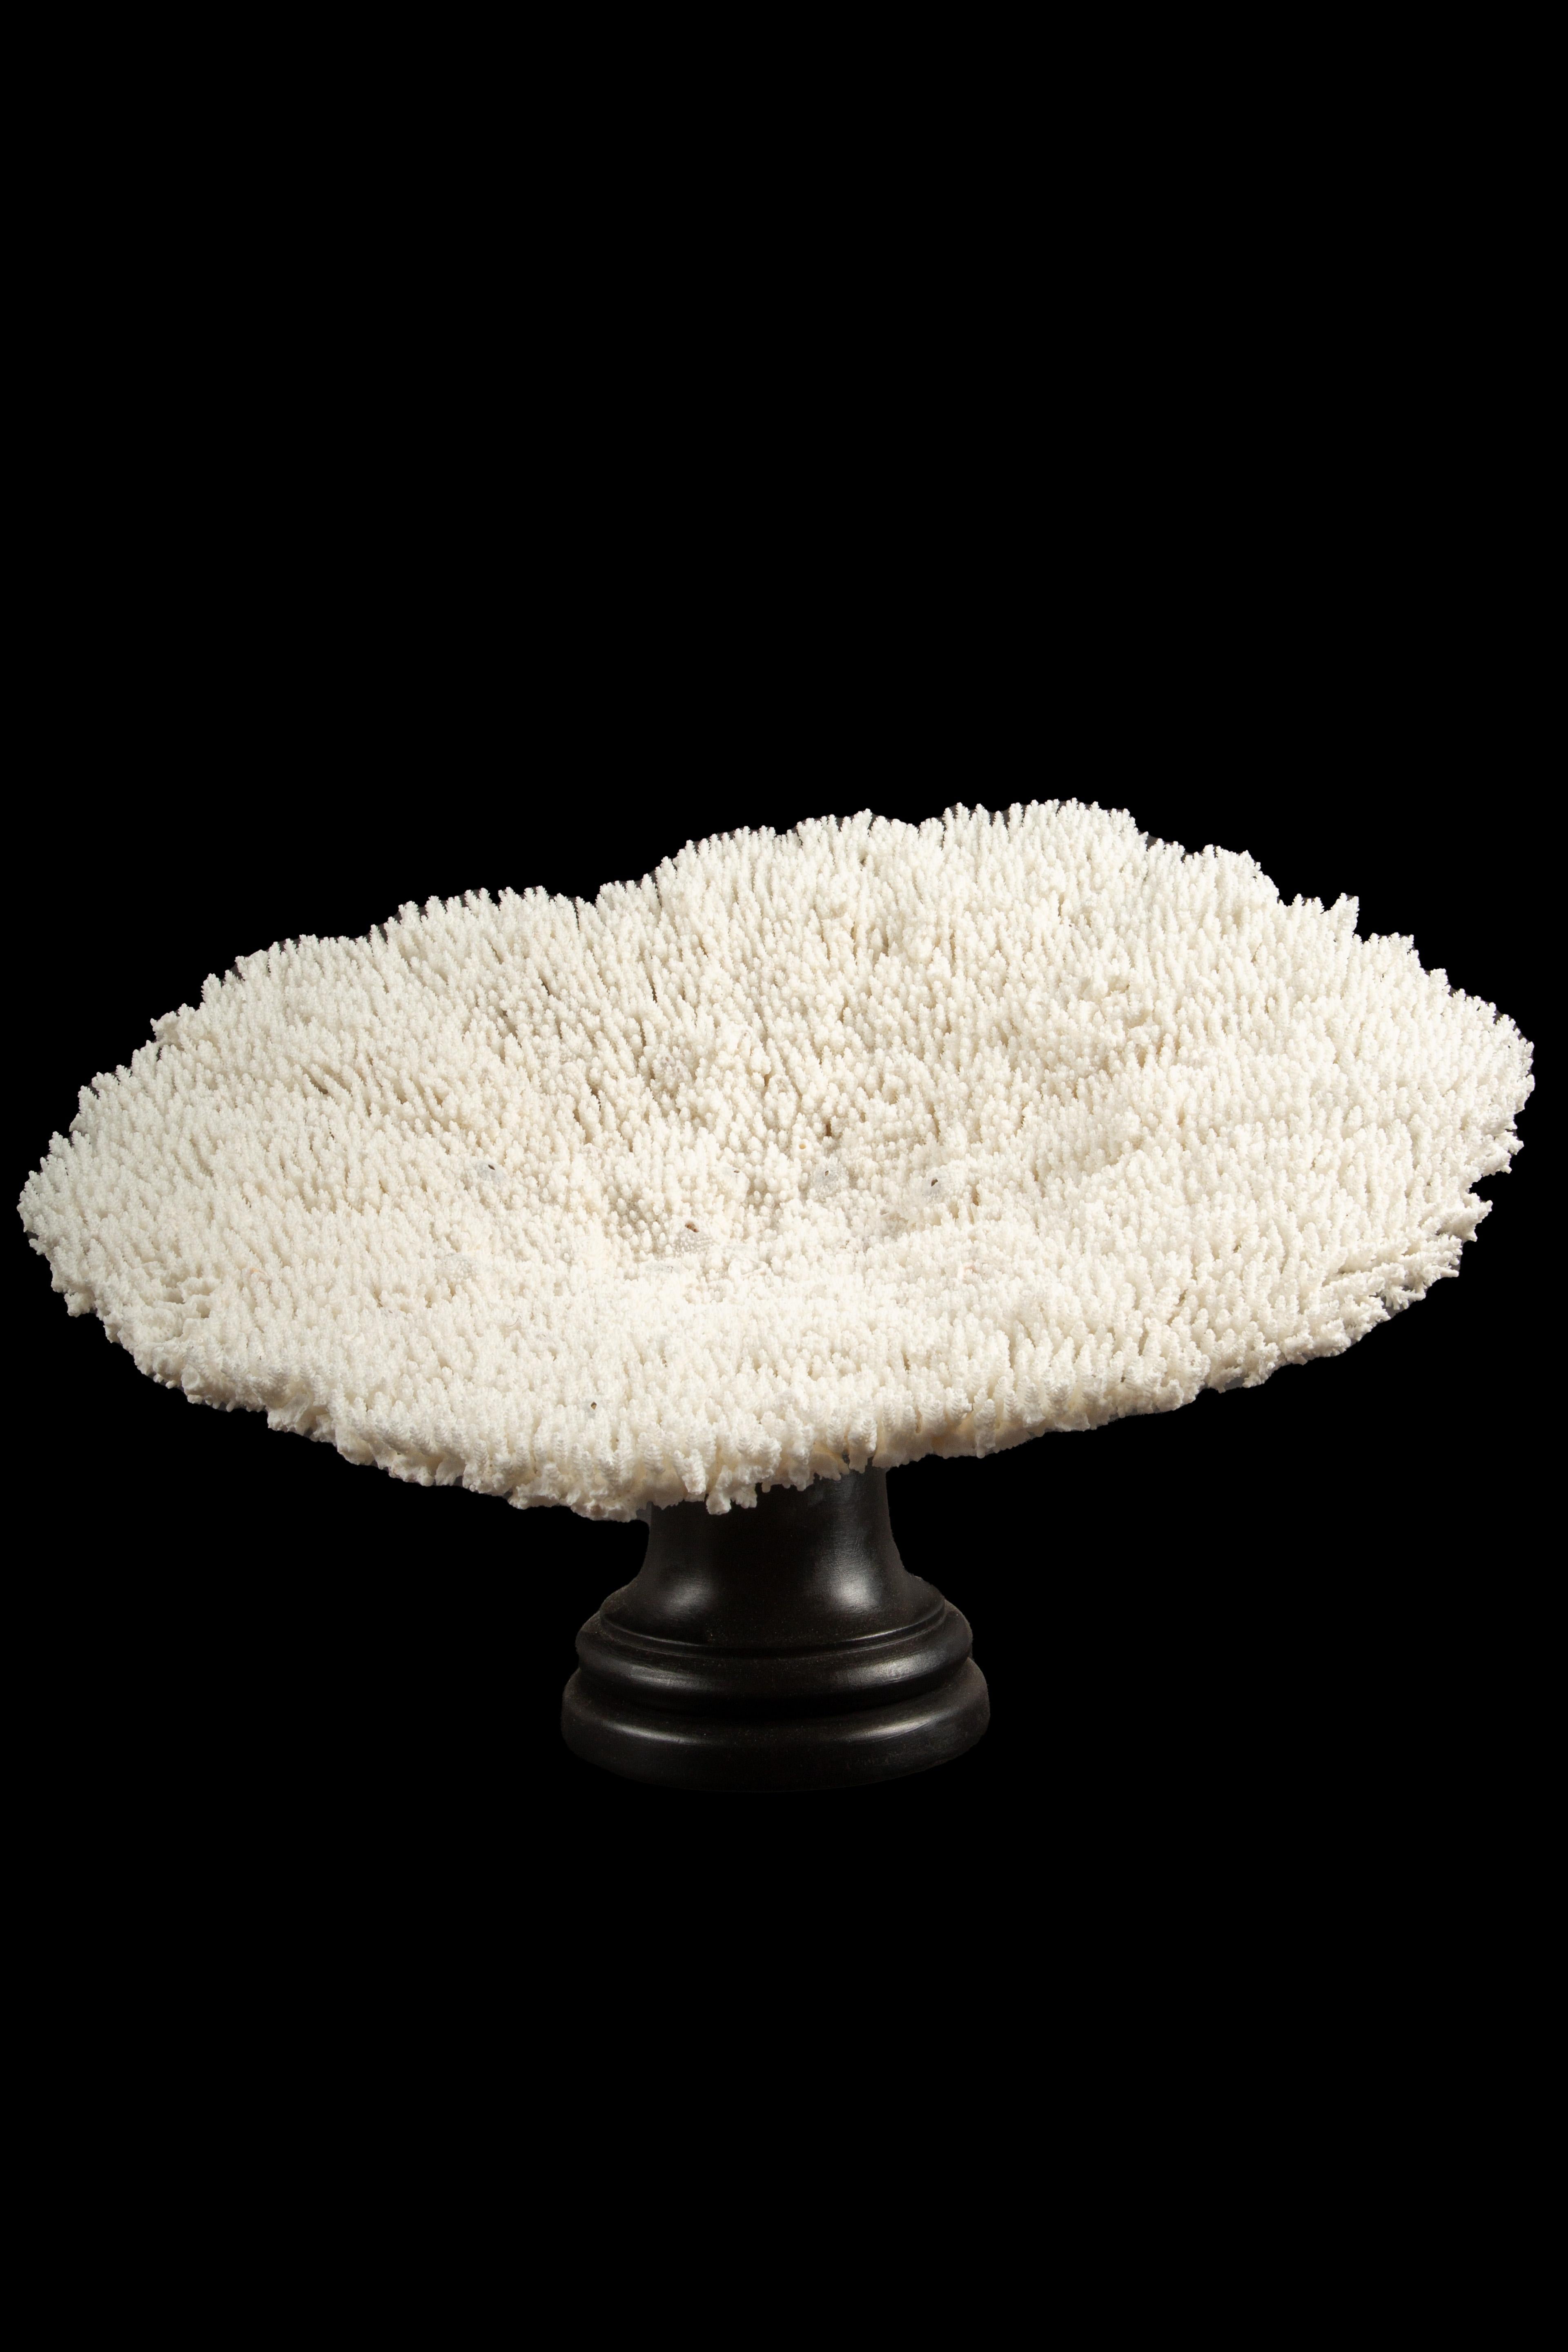 Table Coral Specimen, delicately presented on a meticulously crafted Italian hand-turned custom black lacquer mount. This stunning centerpiece effortlessly combines nature's artistry with artisanal craftsmanship. The pristine white coral,